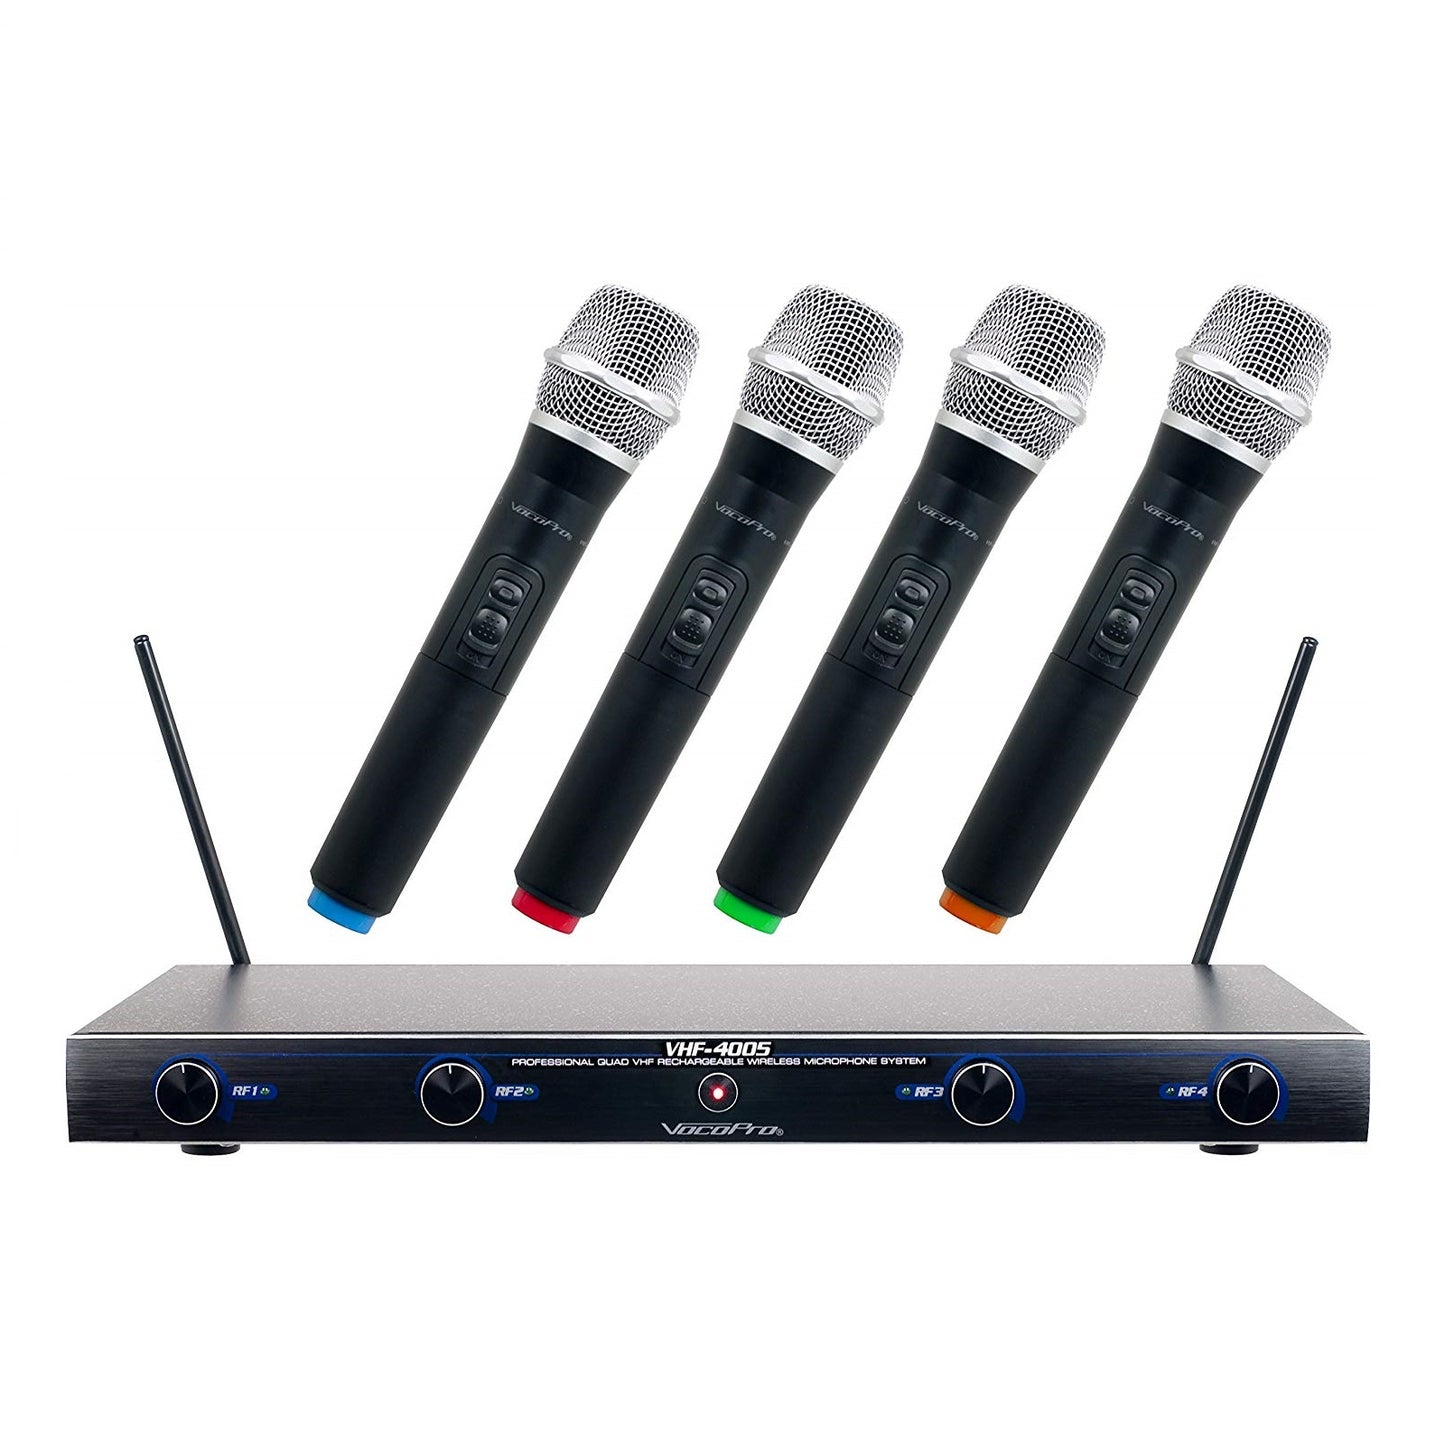 VocoPro VHF-4005 4-Channel VHF Wireless Microphones Rechargeable System